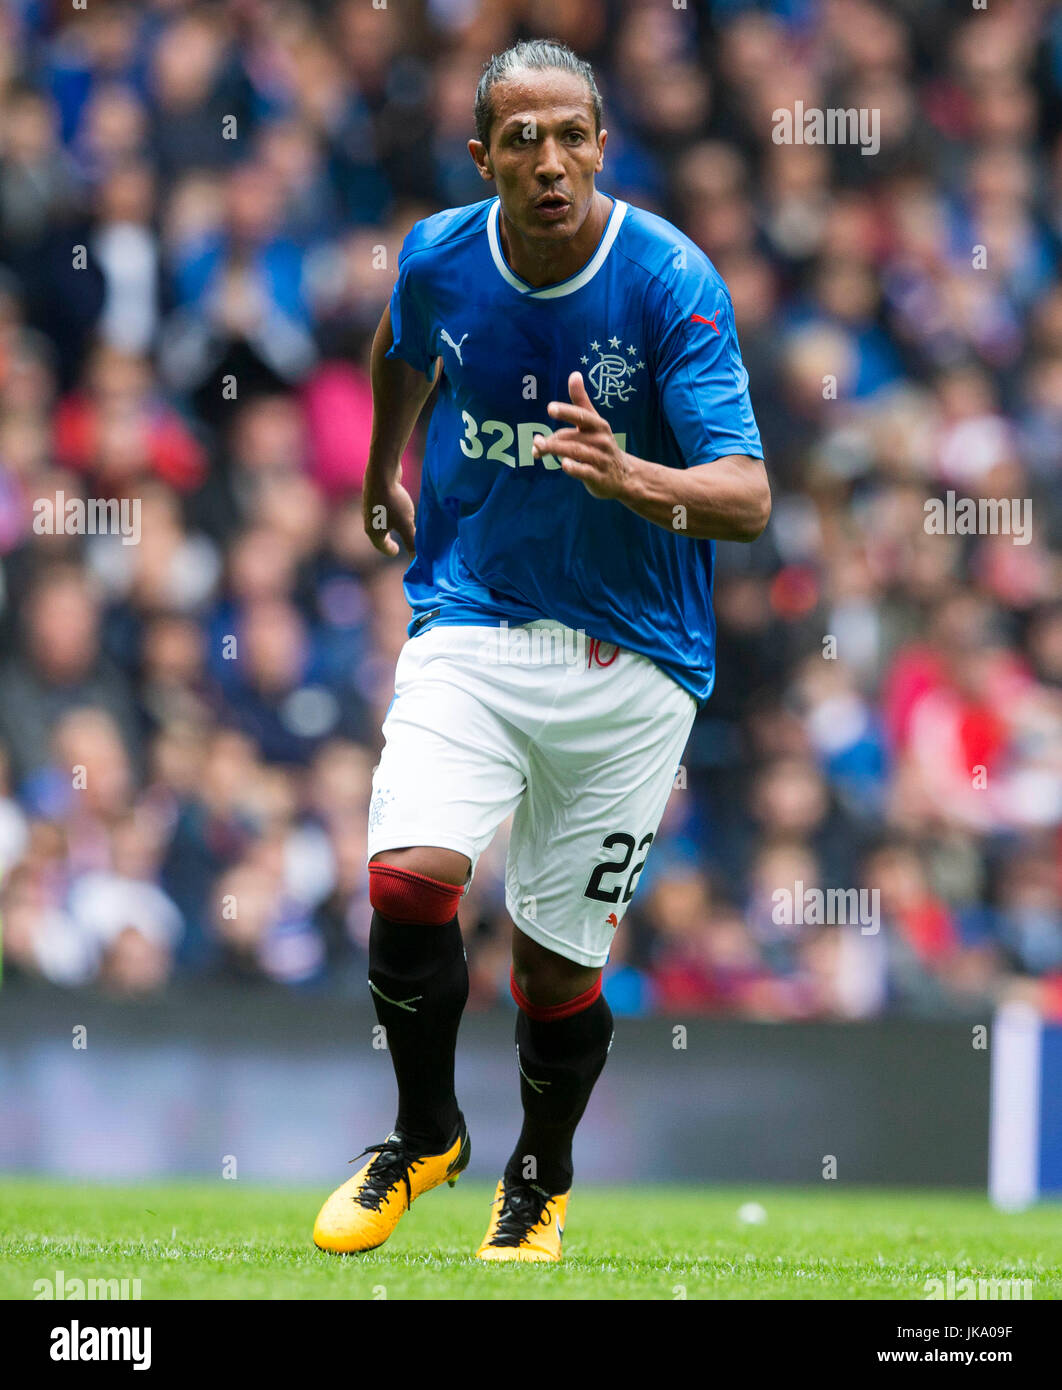 Rangers Bruno Alves during the pre-season friendly match at Ibrox Stadium, Glasgow. PRESS ASSOCIATION Photo. Picture date: Saturday July 22, 2017. See PA story SOCCER Rangers. Photo credit should read: Jeff Holmes/PA Wire. RESTRICTIONS: EDITORIAL USE ONLY Stock Photo